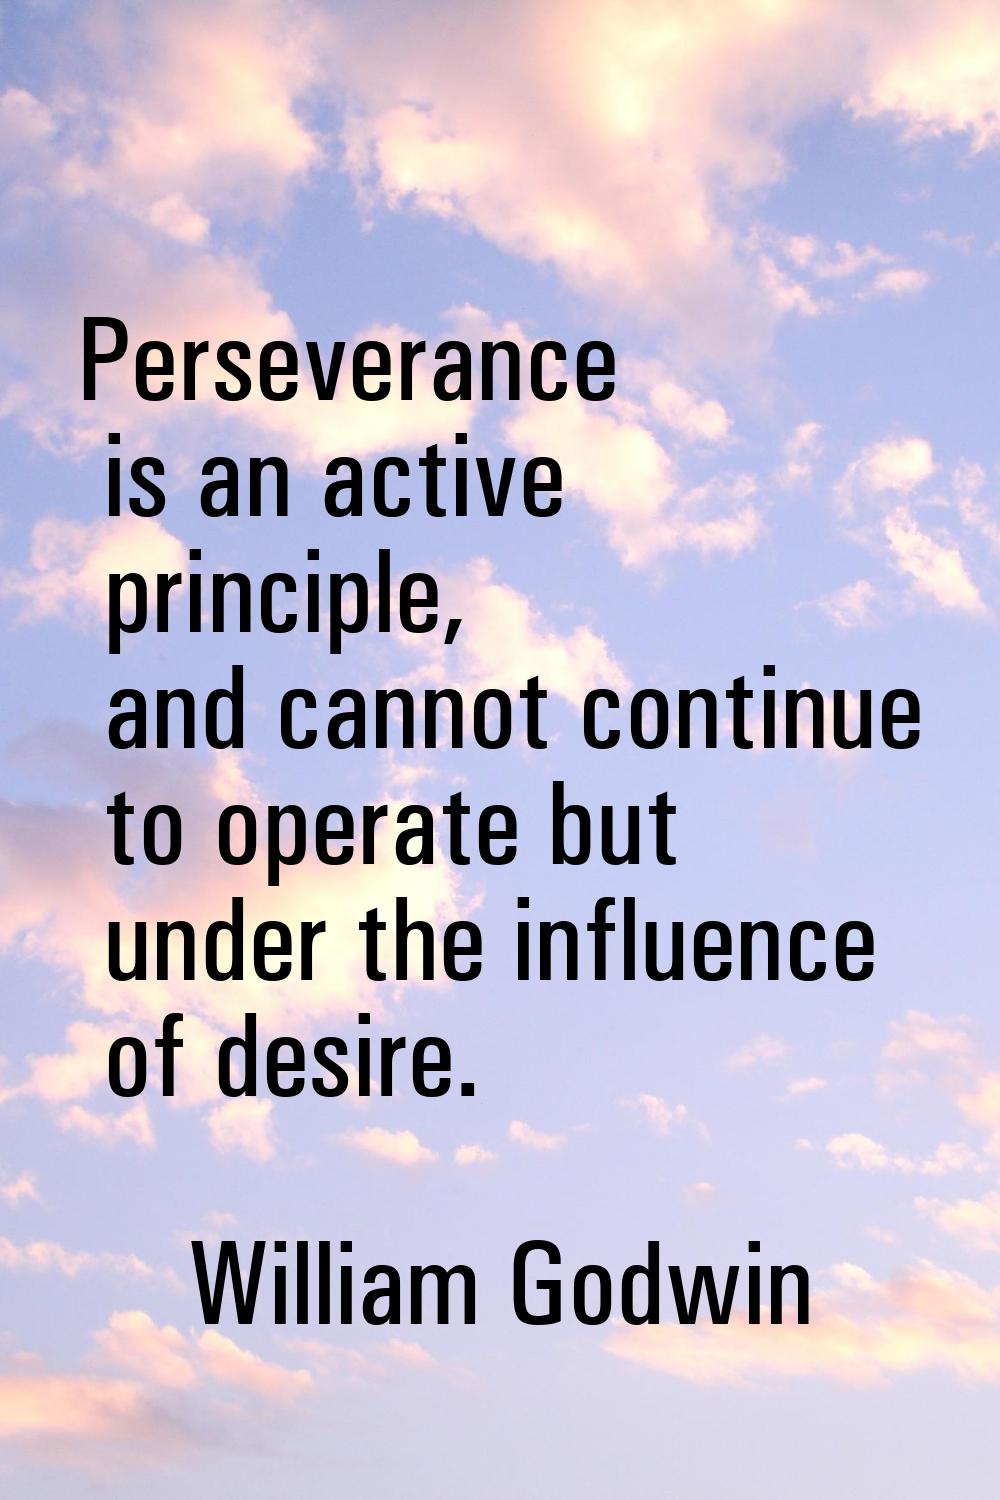 Perseverance is an active principle, and cannot continue to operate but under the influence of desi